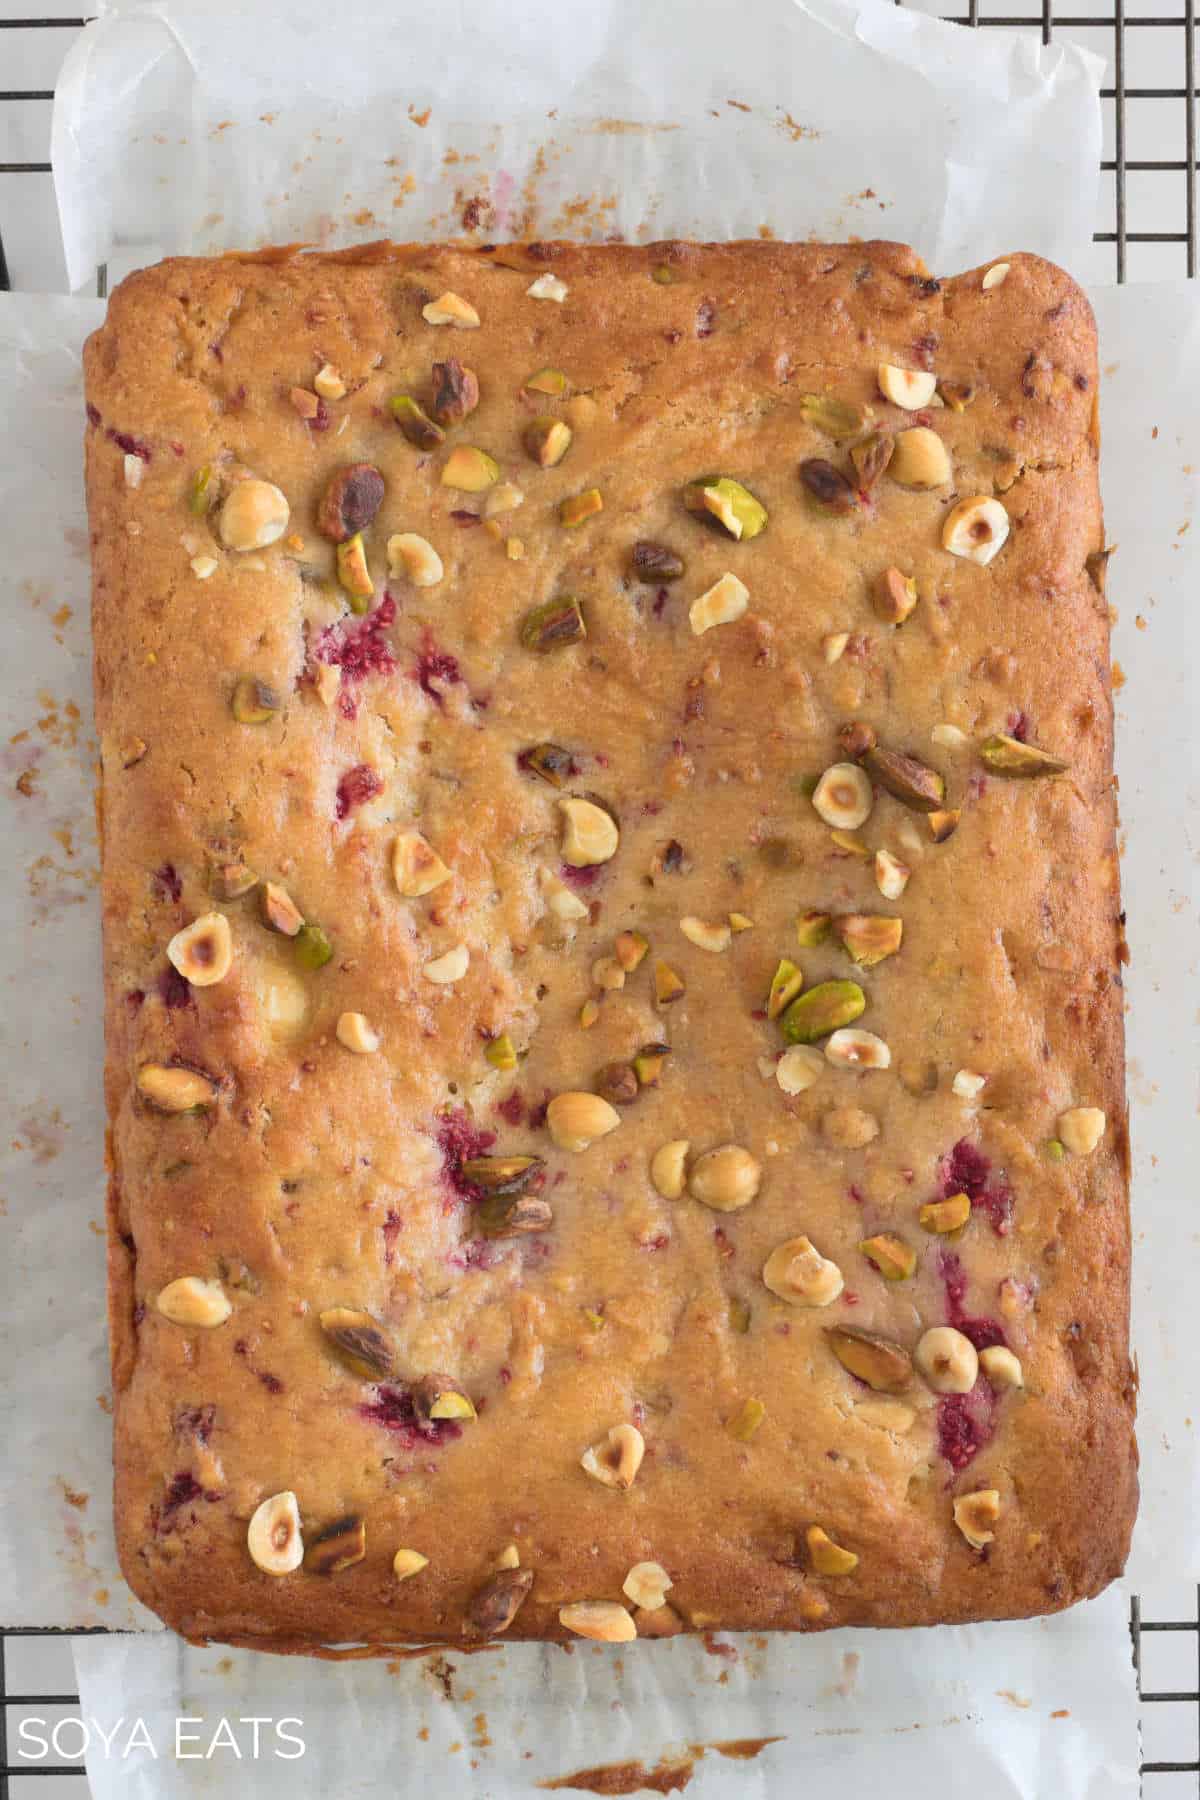 An uncut white chocolate and raspberry blondie on baking paper on a cake rack.